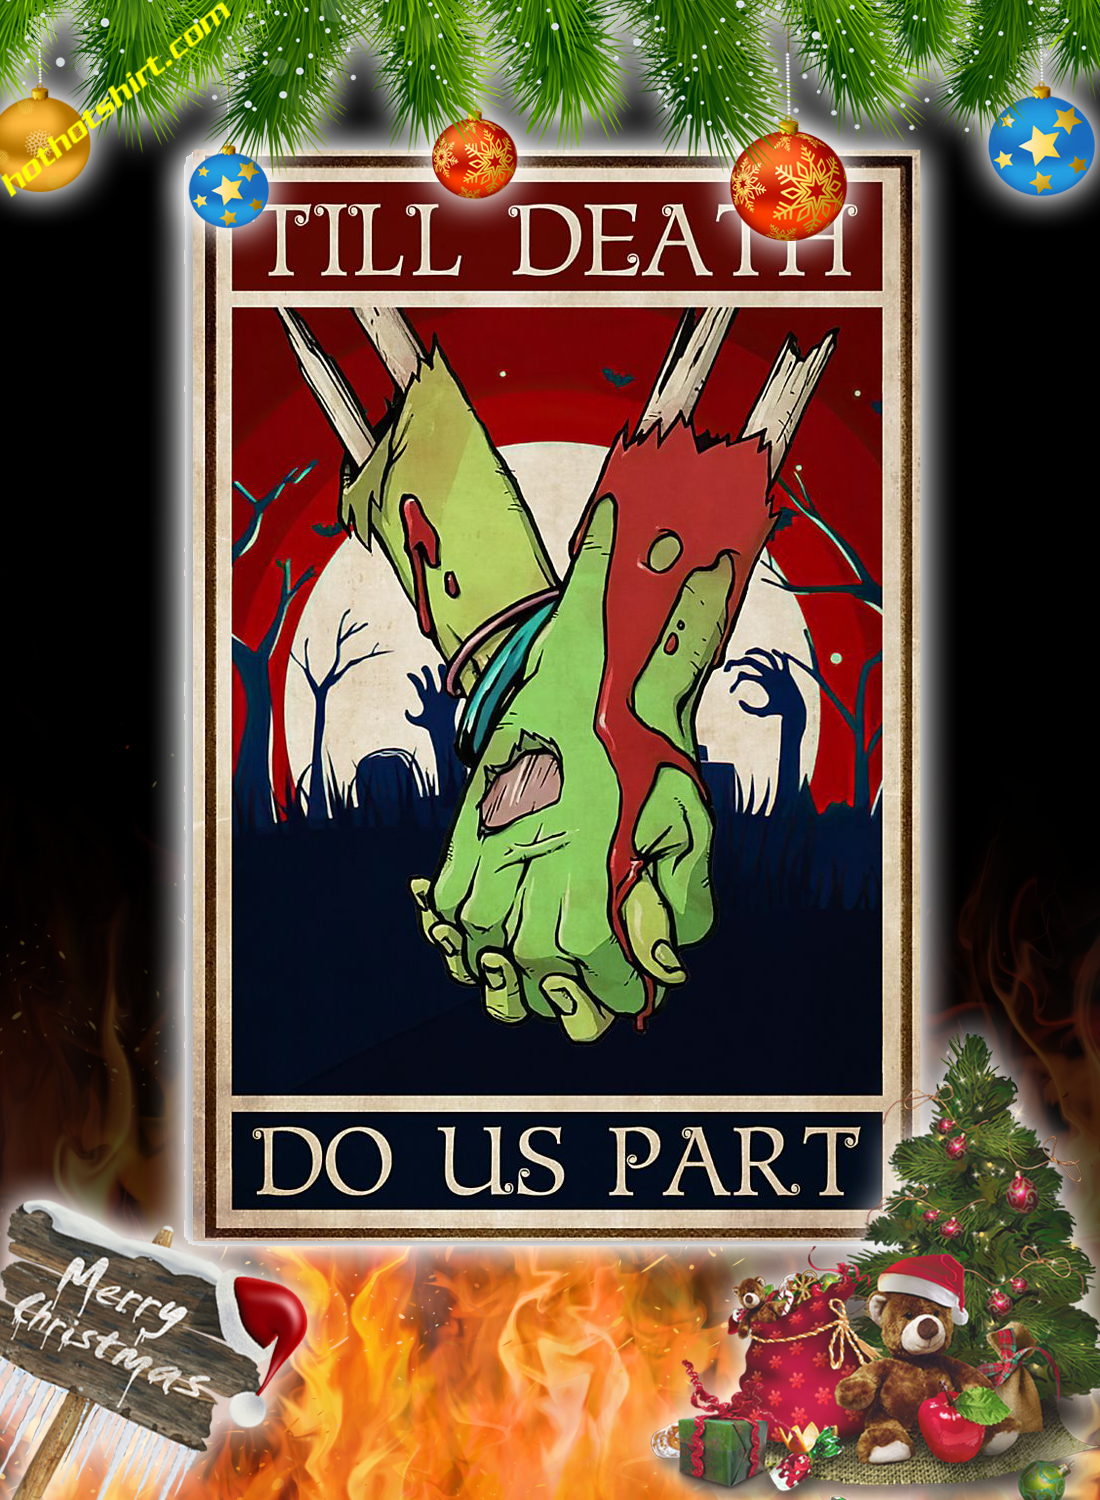 Zoombie till death do us part poster